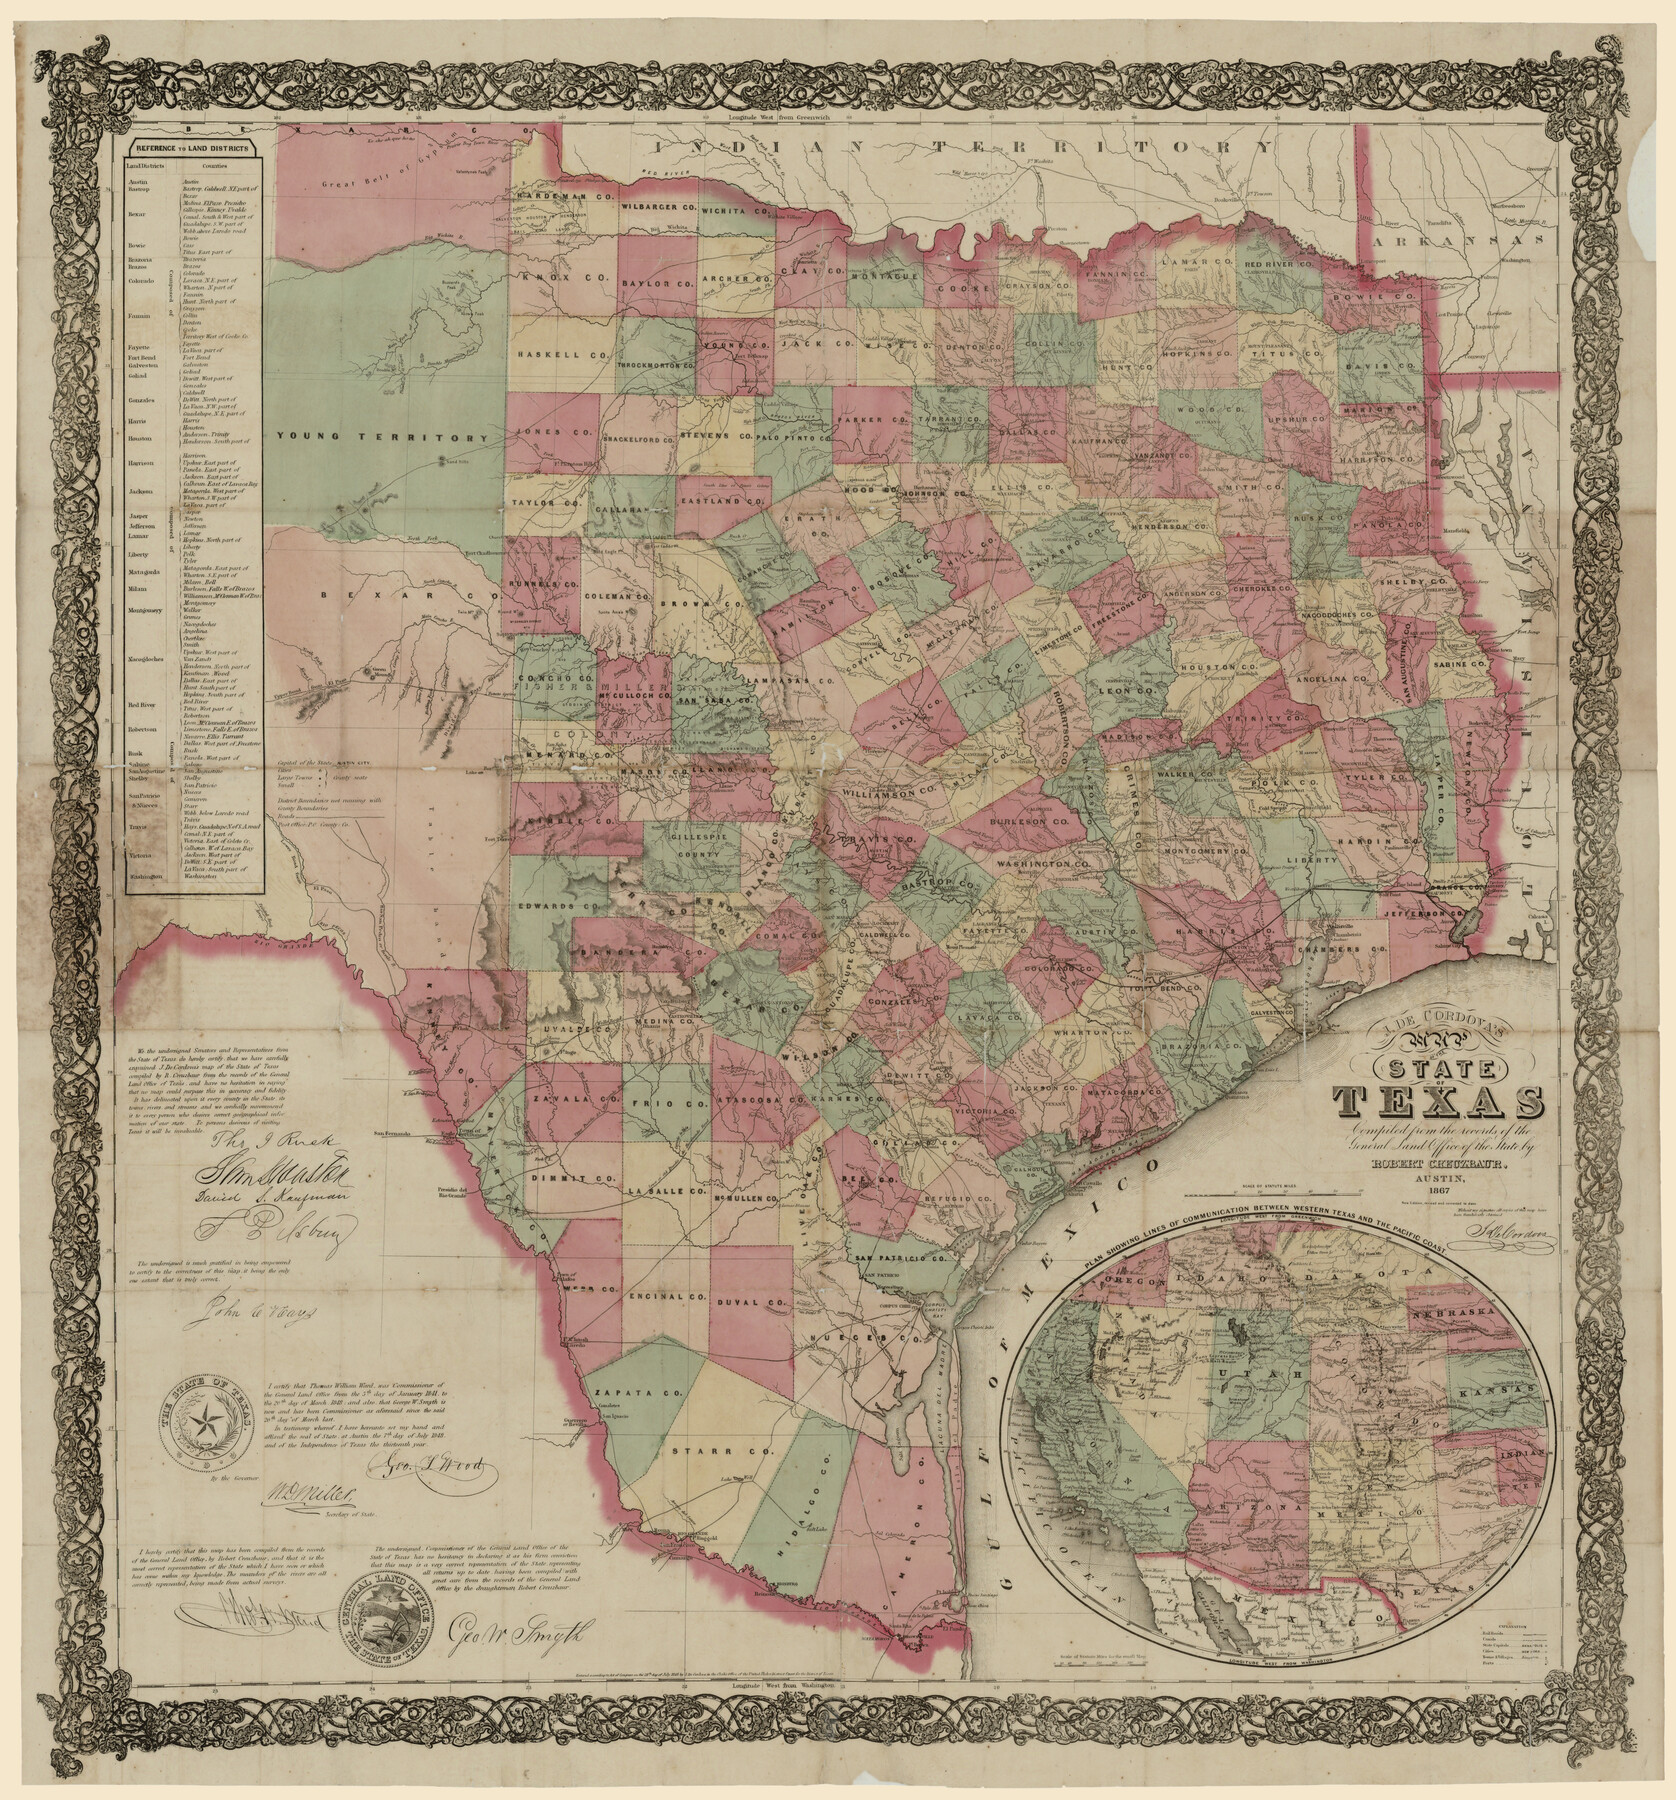 93759, J. De Cordova's Map of the State of Texas Compiled from the records of the General Land Office of the State, Rees-Jones Digital Map Collection